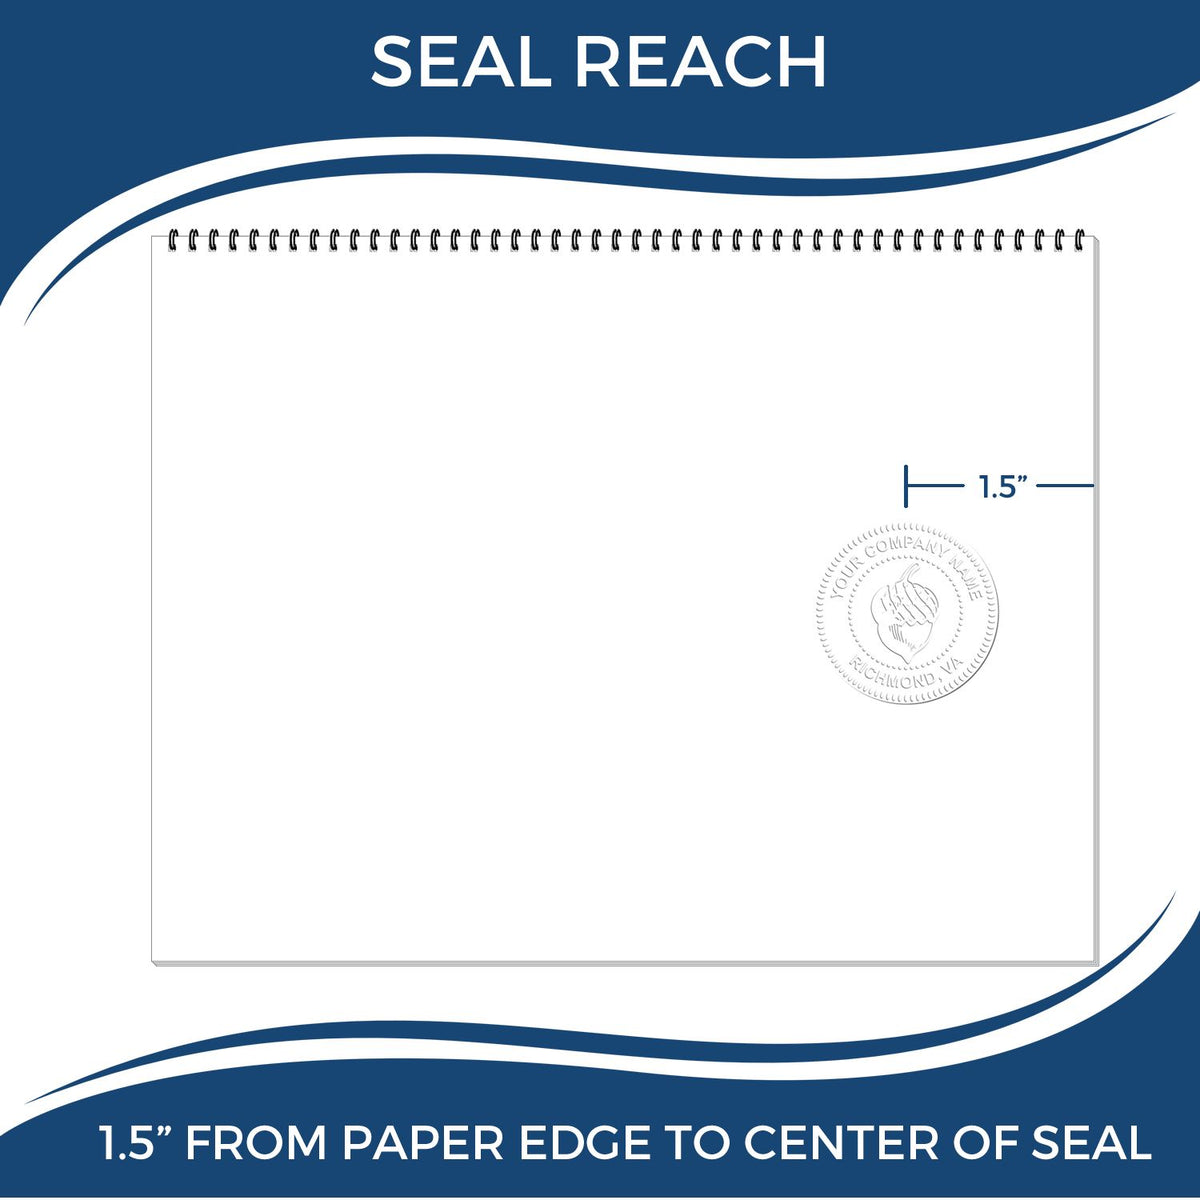 An infographic showing the seal reach which is represented by a ruler and a miniature seal image of the Gift Arizona Land Surveyor Seal